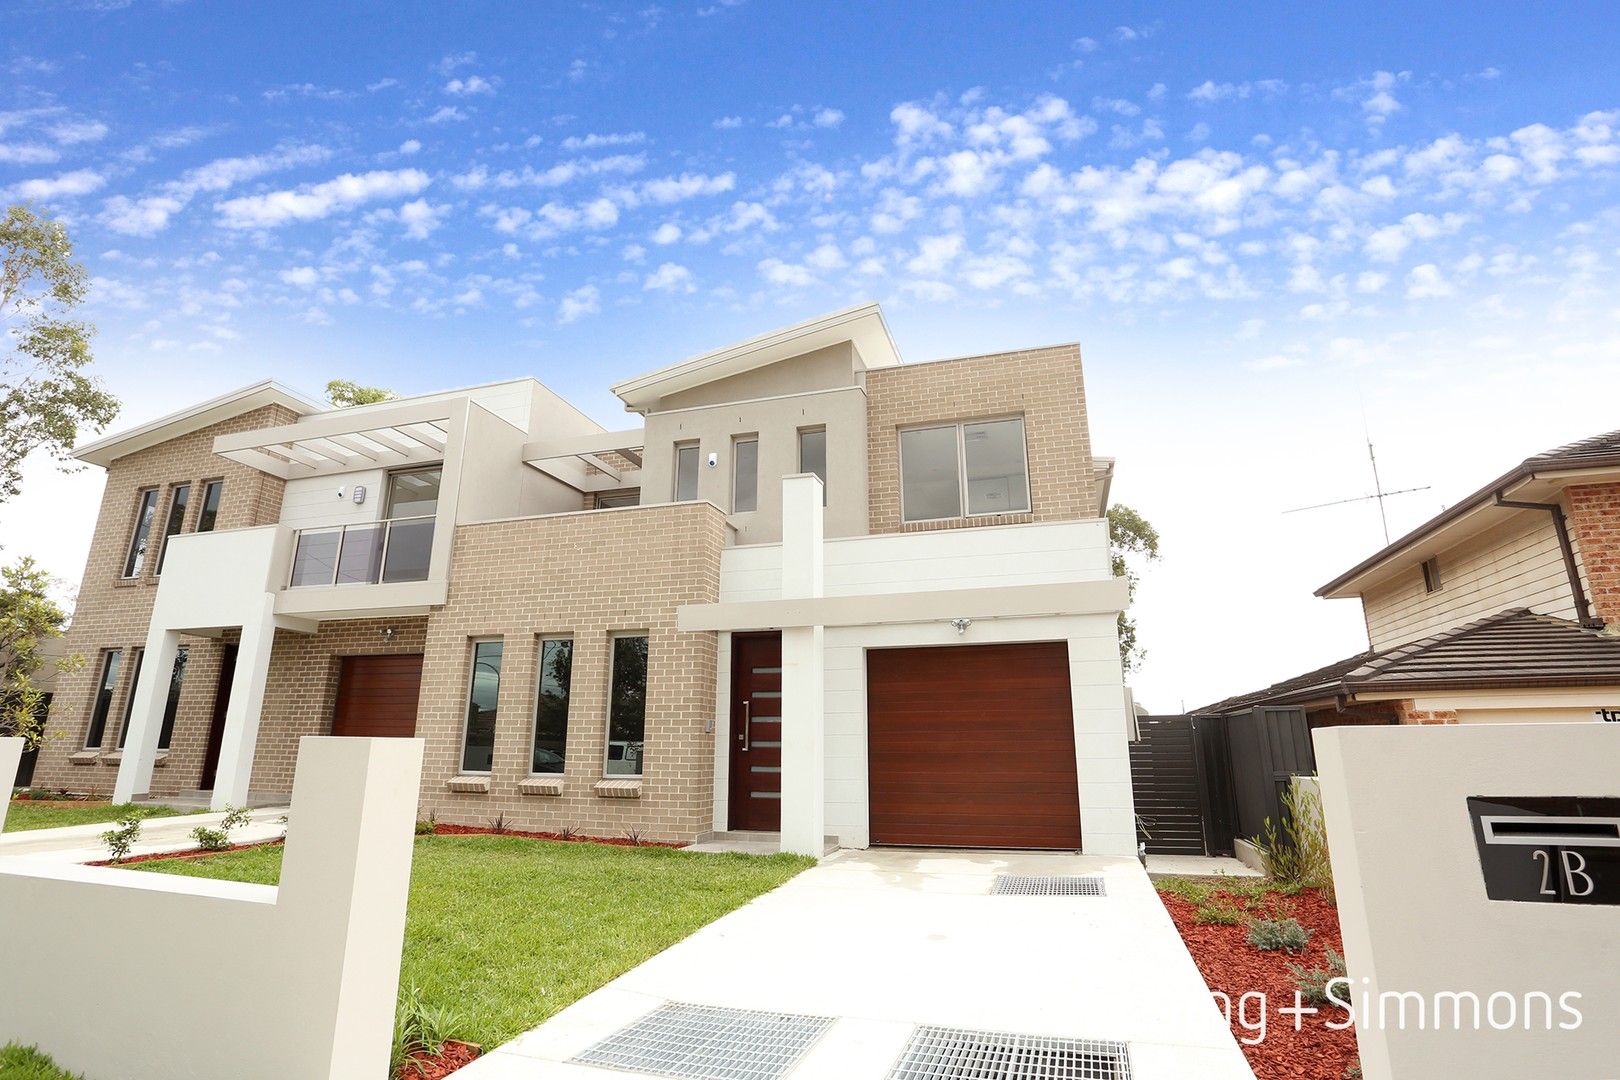 2B Constitution Road, Constitution Hill NSW 2145, Image 0